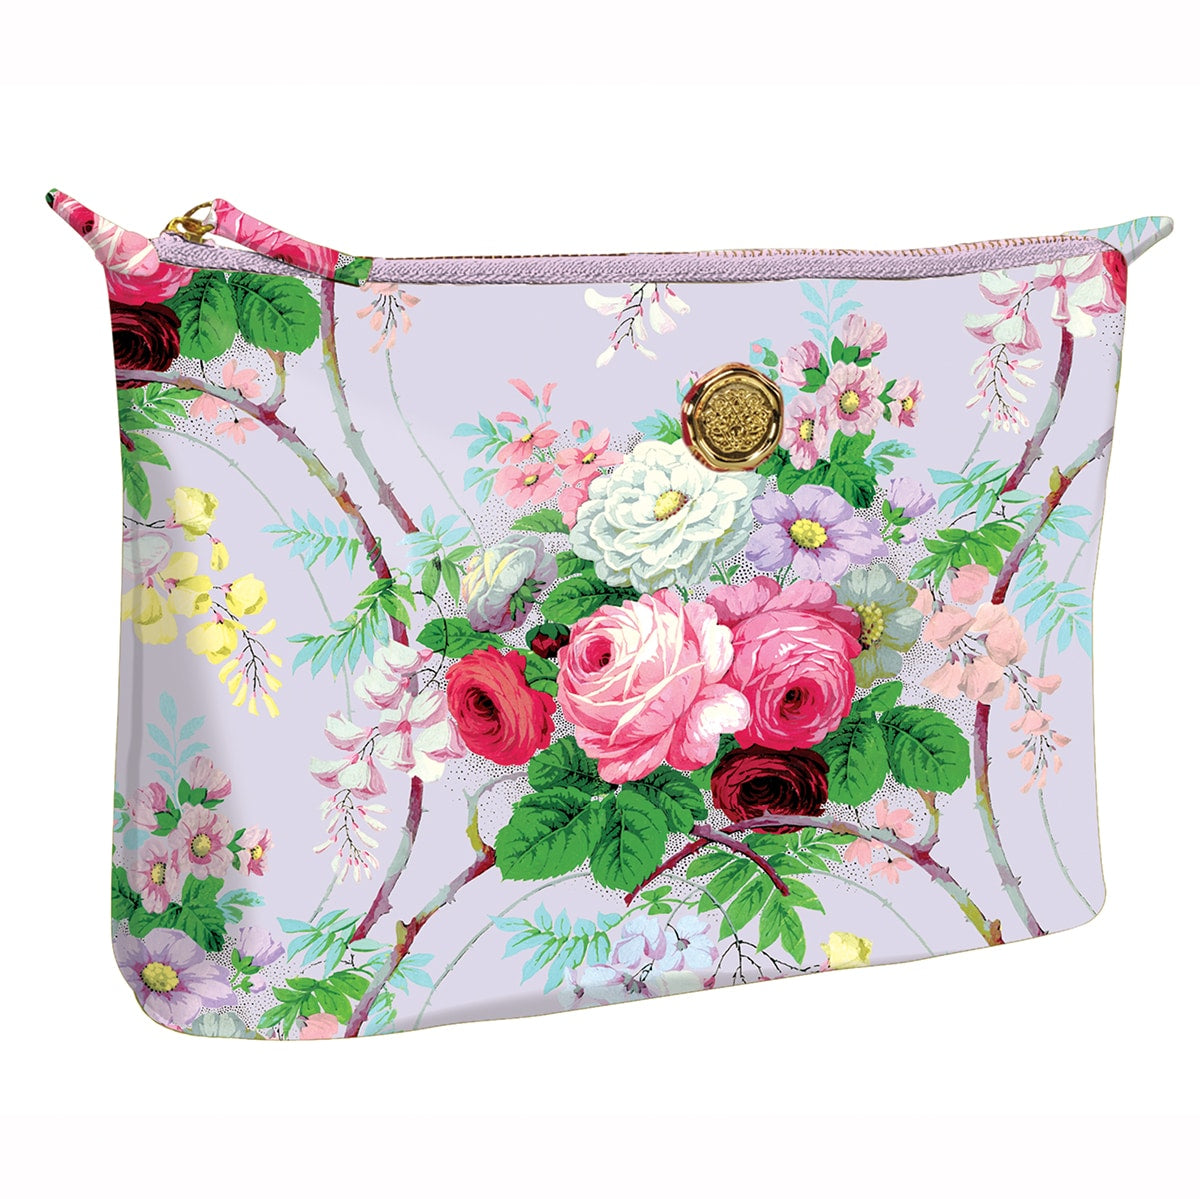 An image of the Lillian Large Cosmetic Bag with flowers on it.